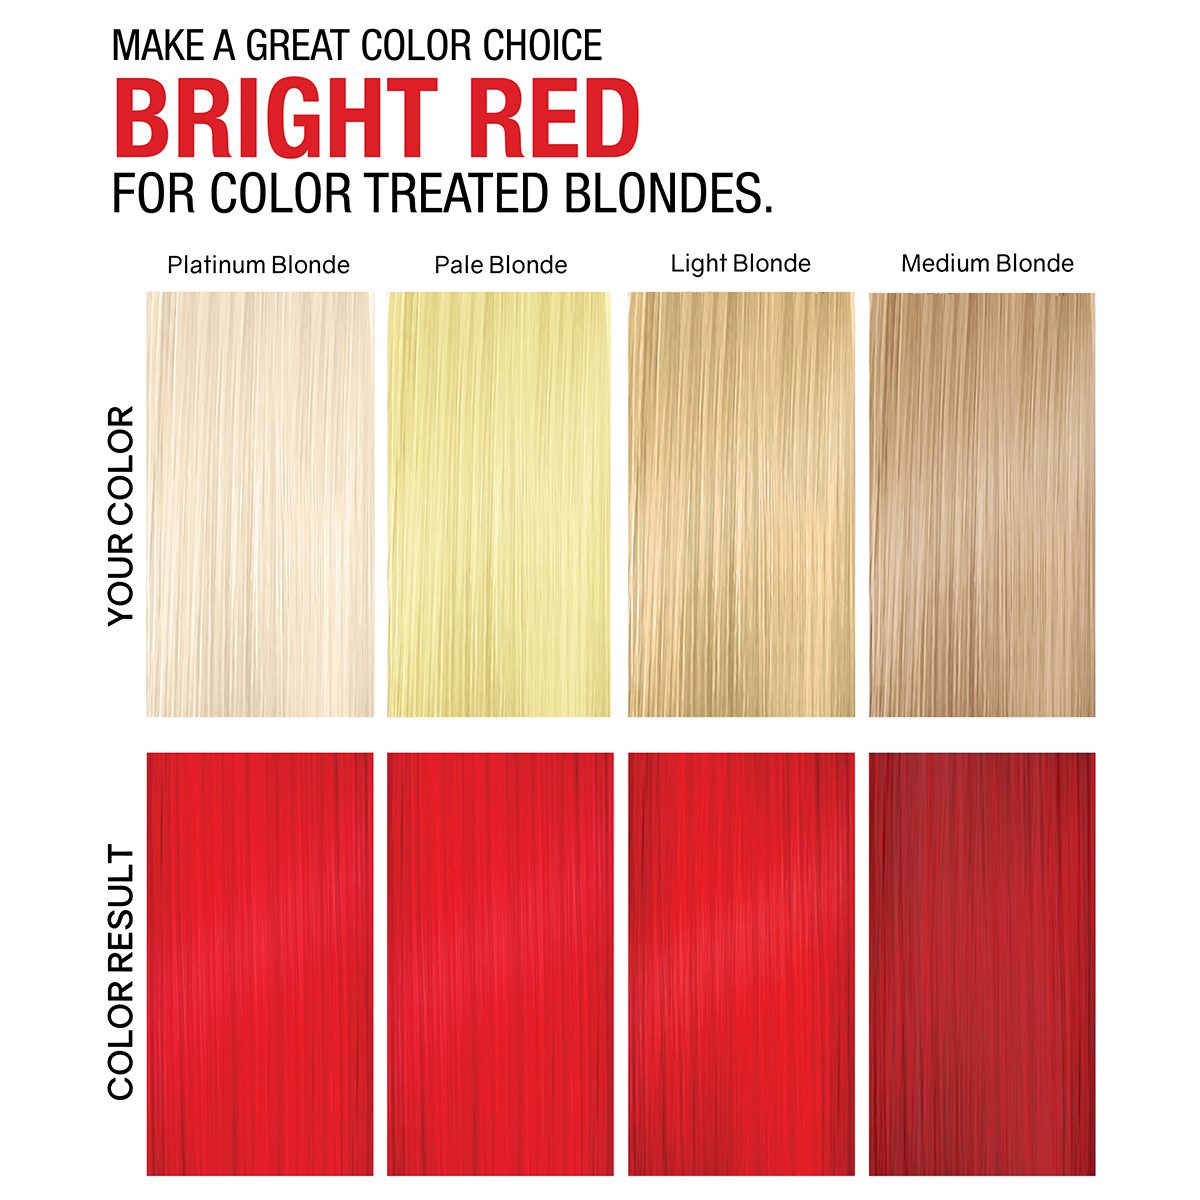 Bright Red for color treated blondes.